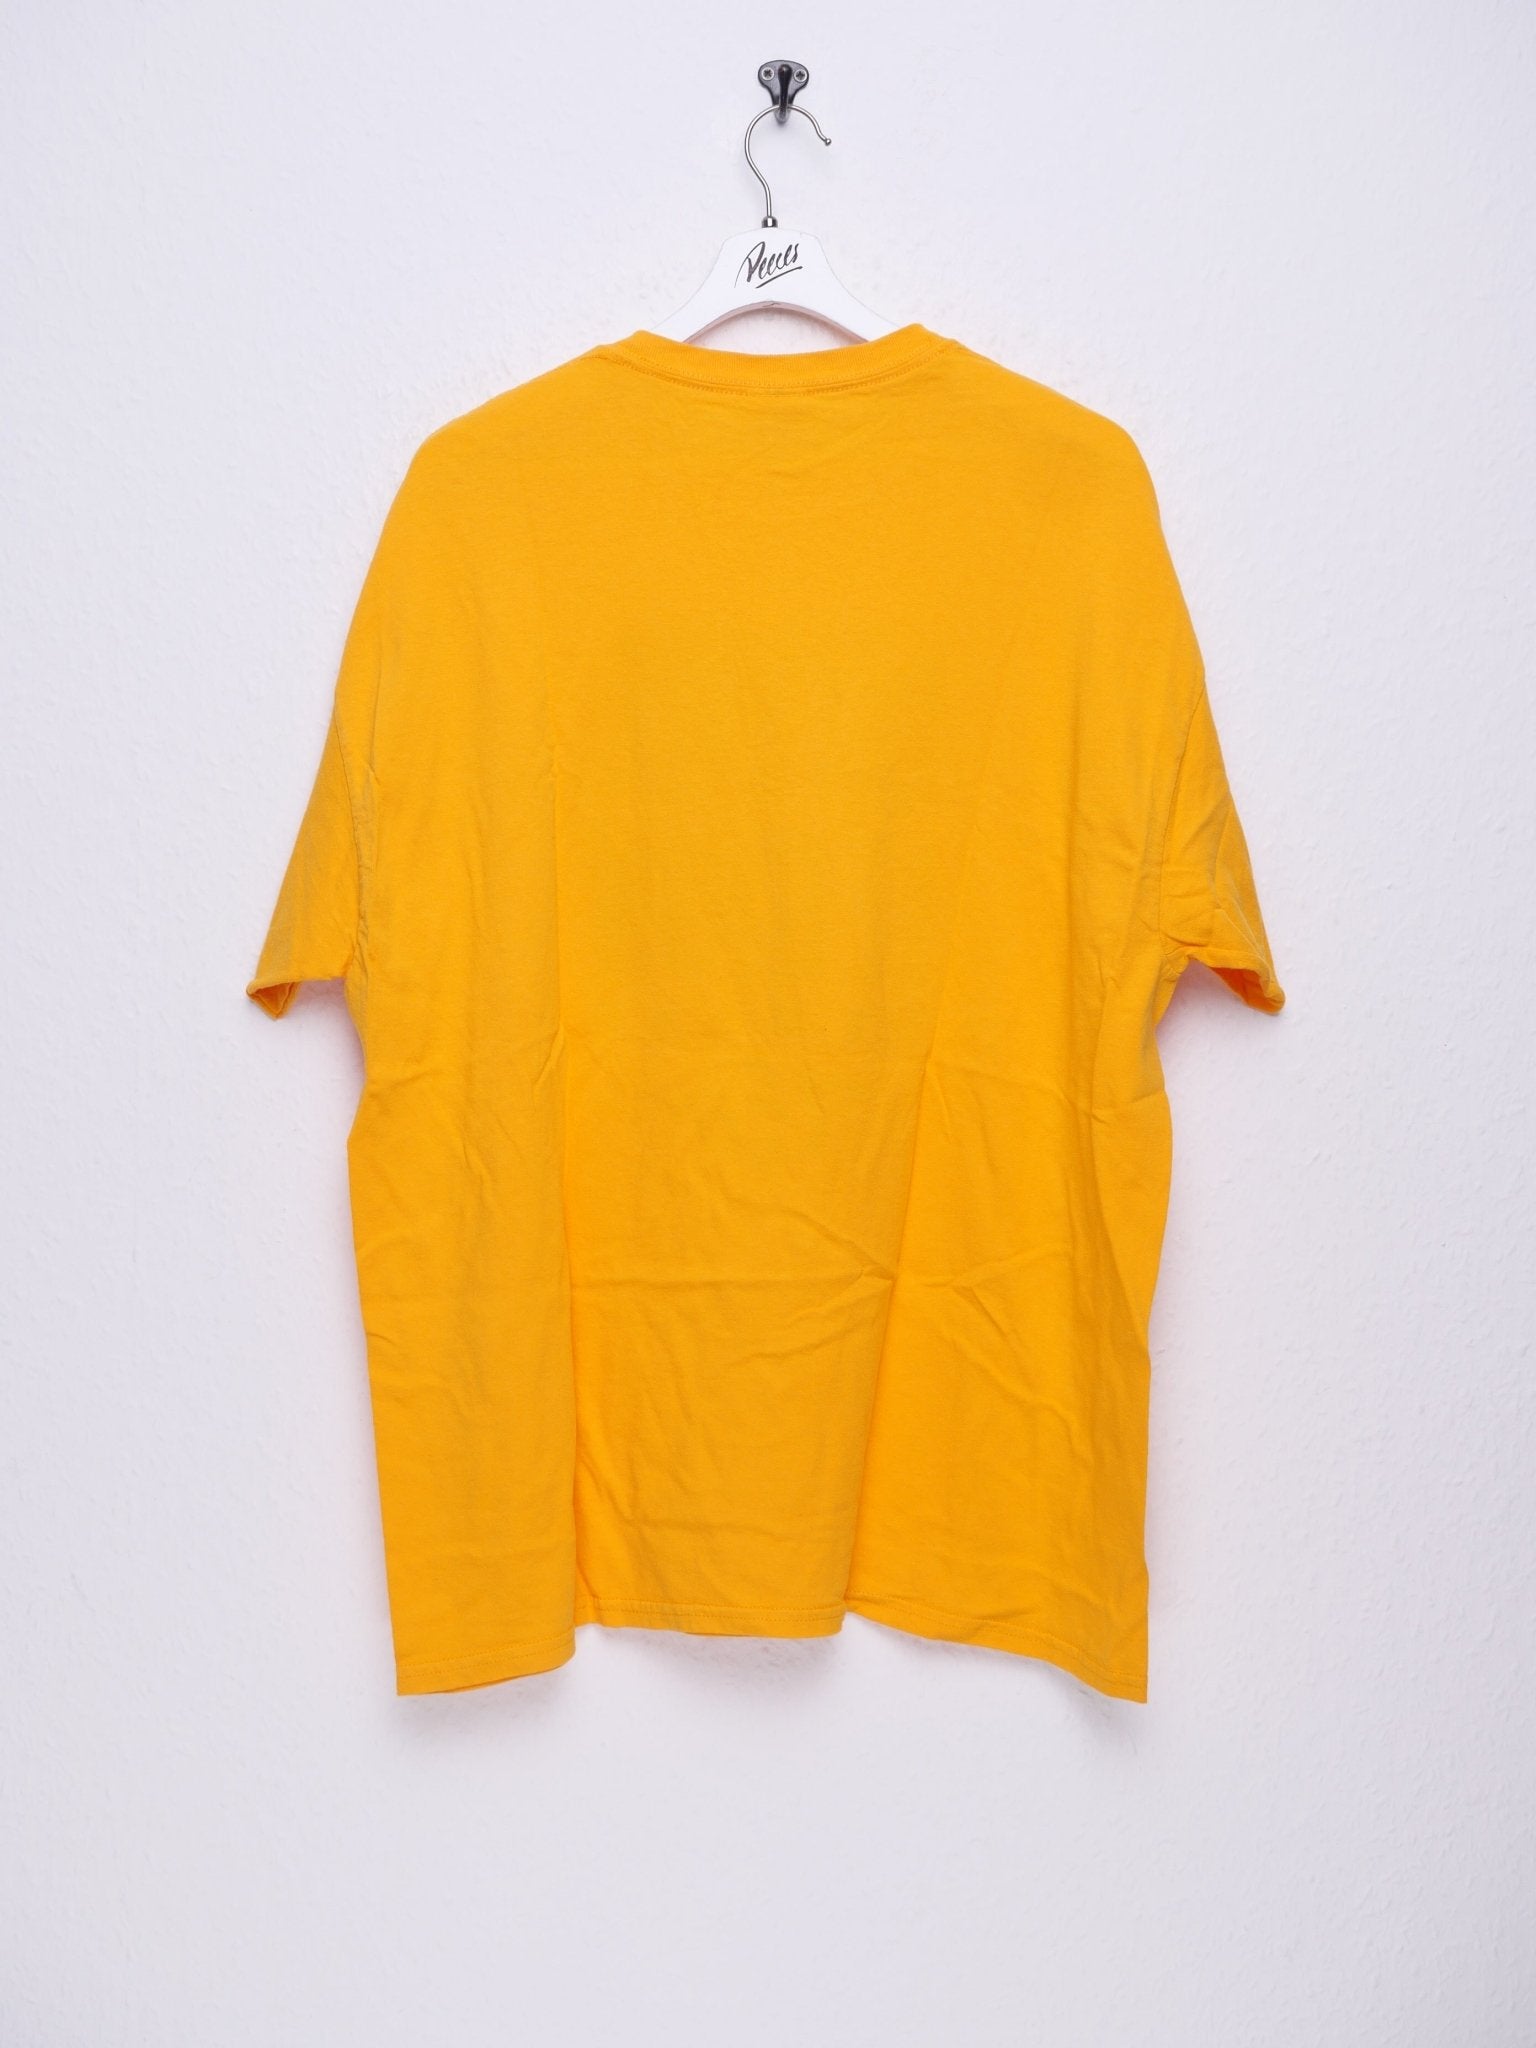 printed Spellout oversized yellow Shirt - Peeces